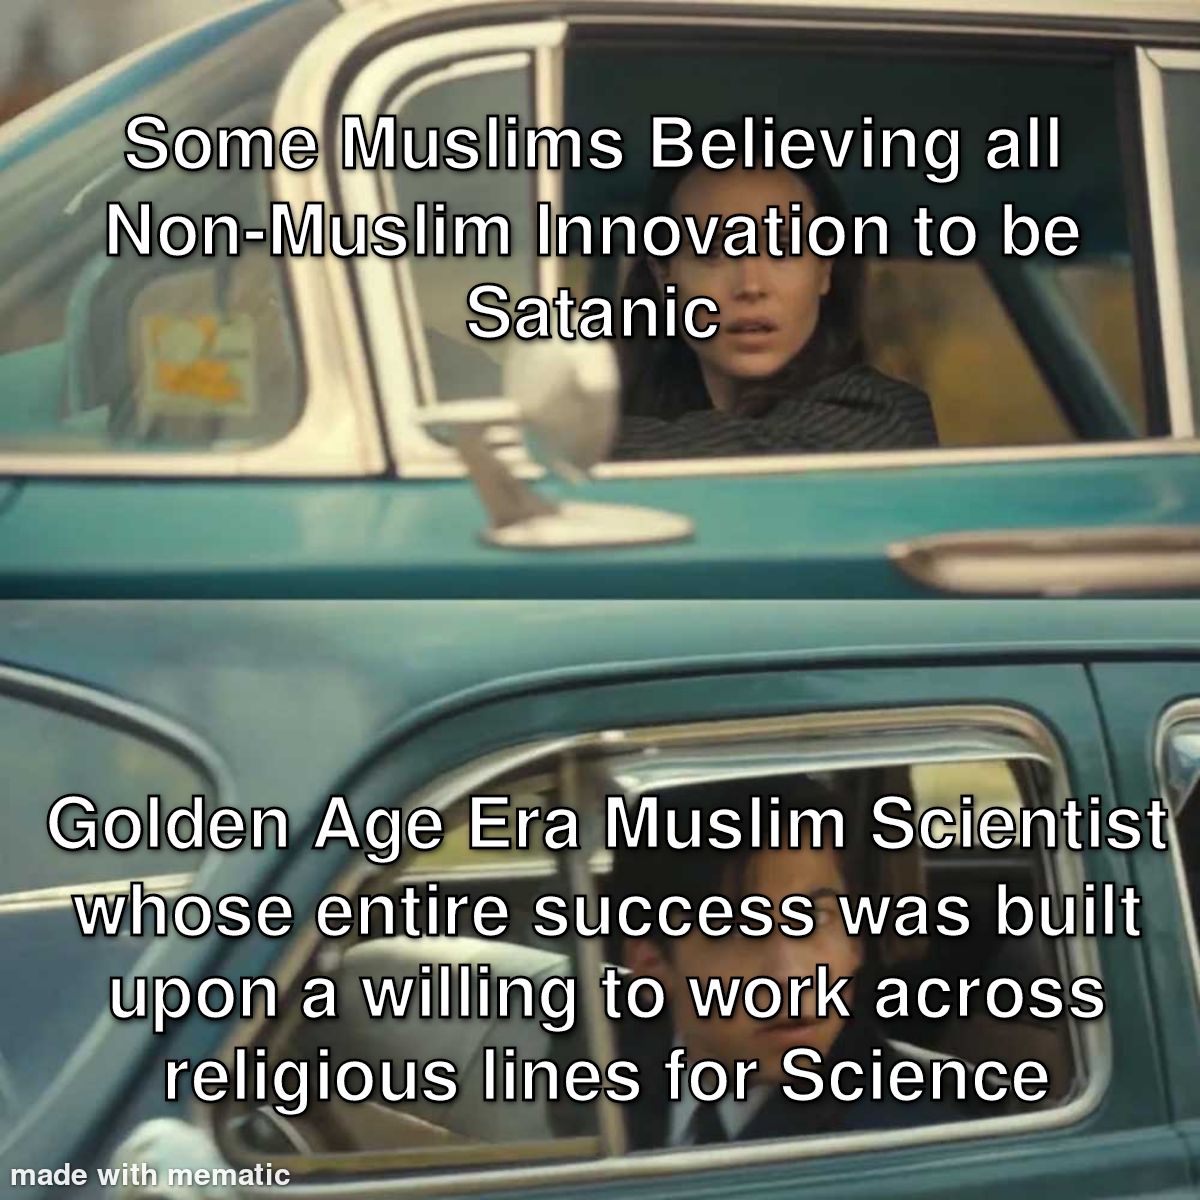 I know that some Muslims also opposed the sciences of the Golden Age